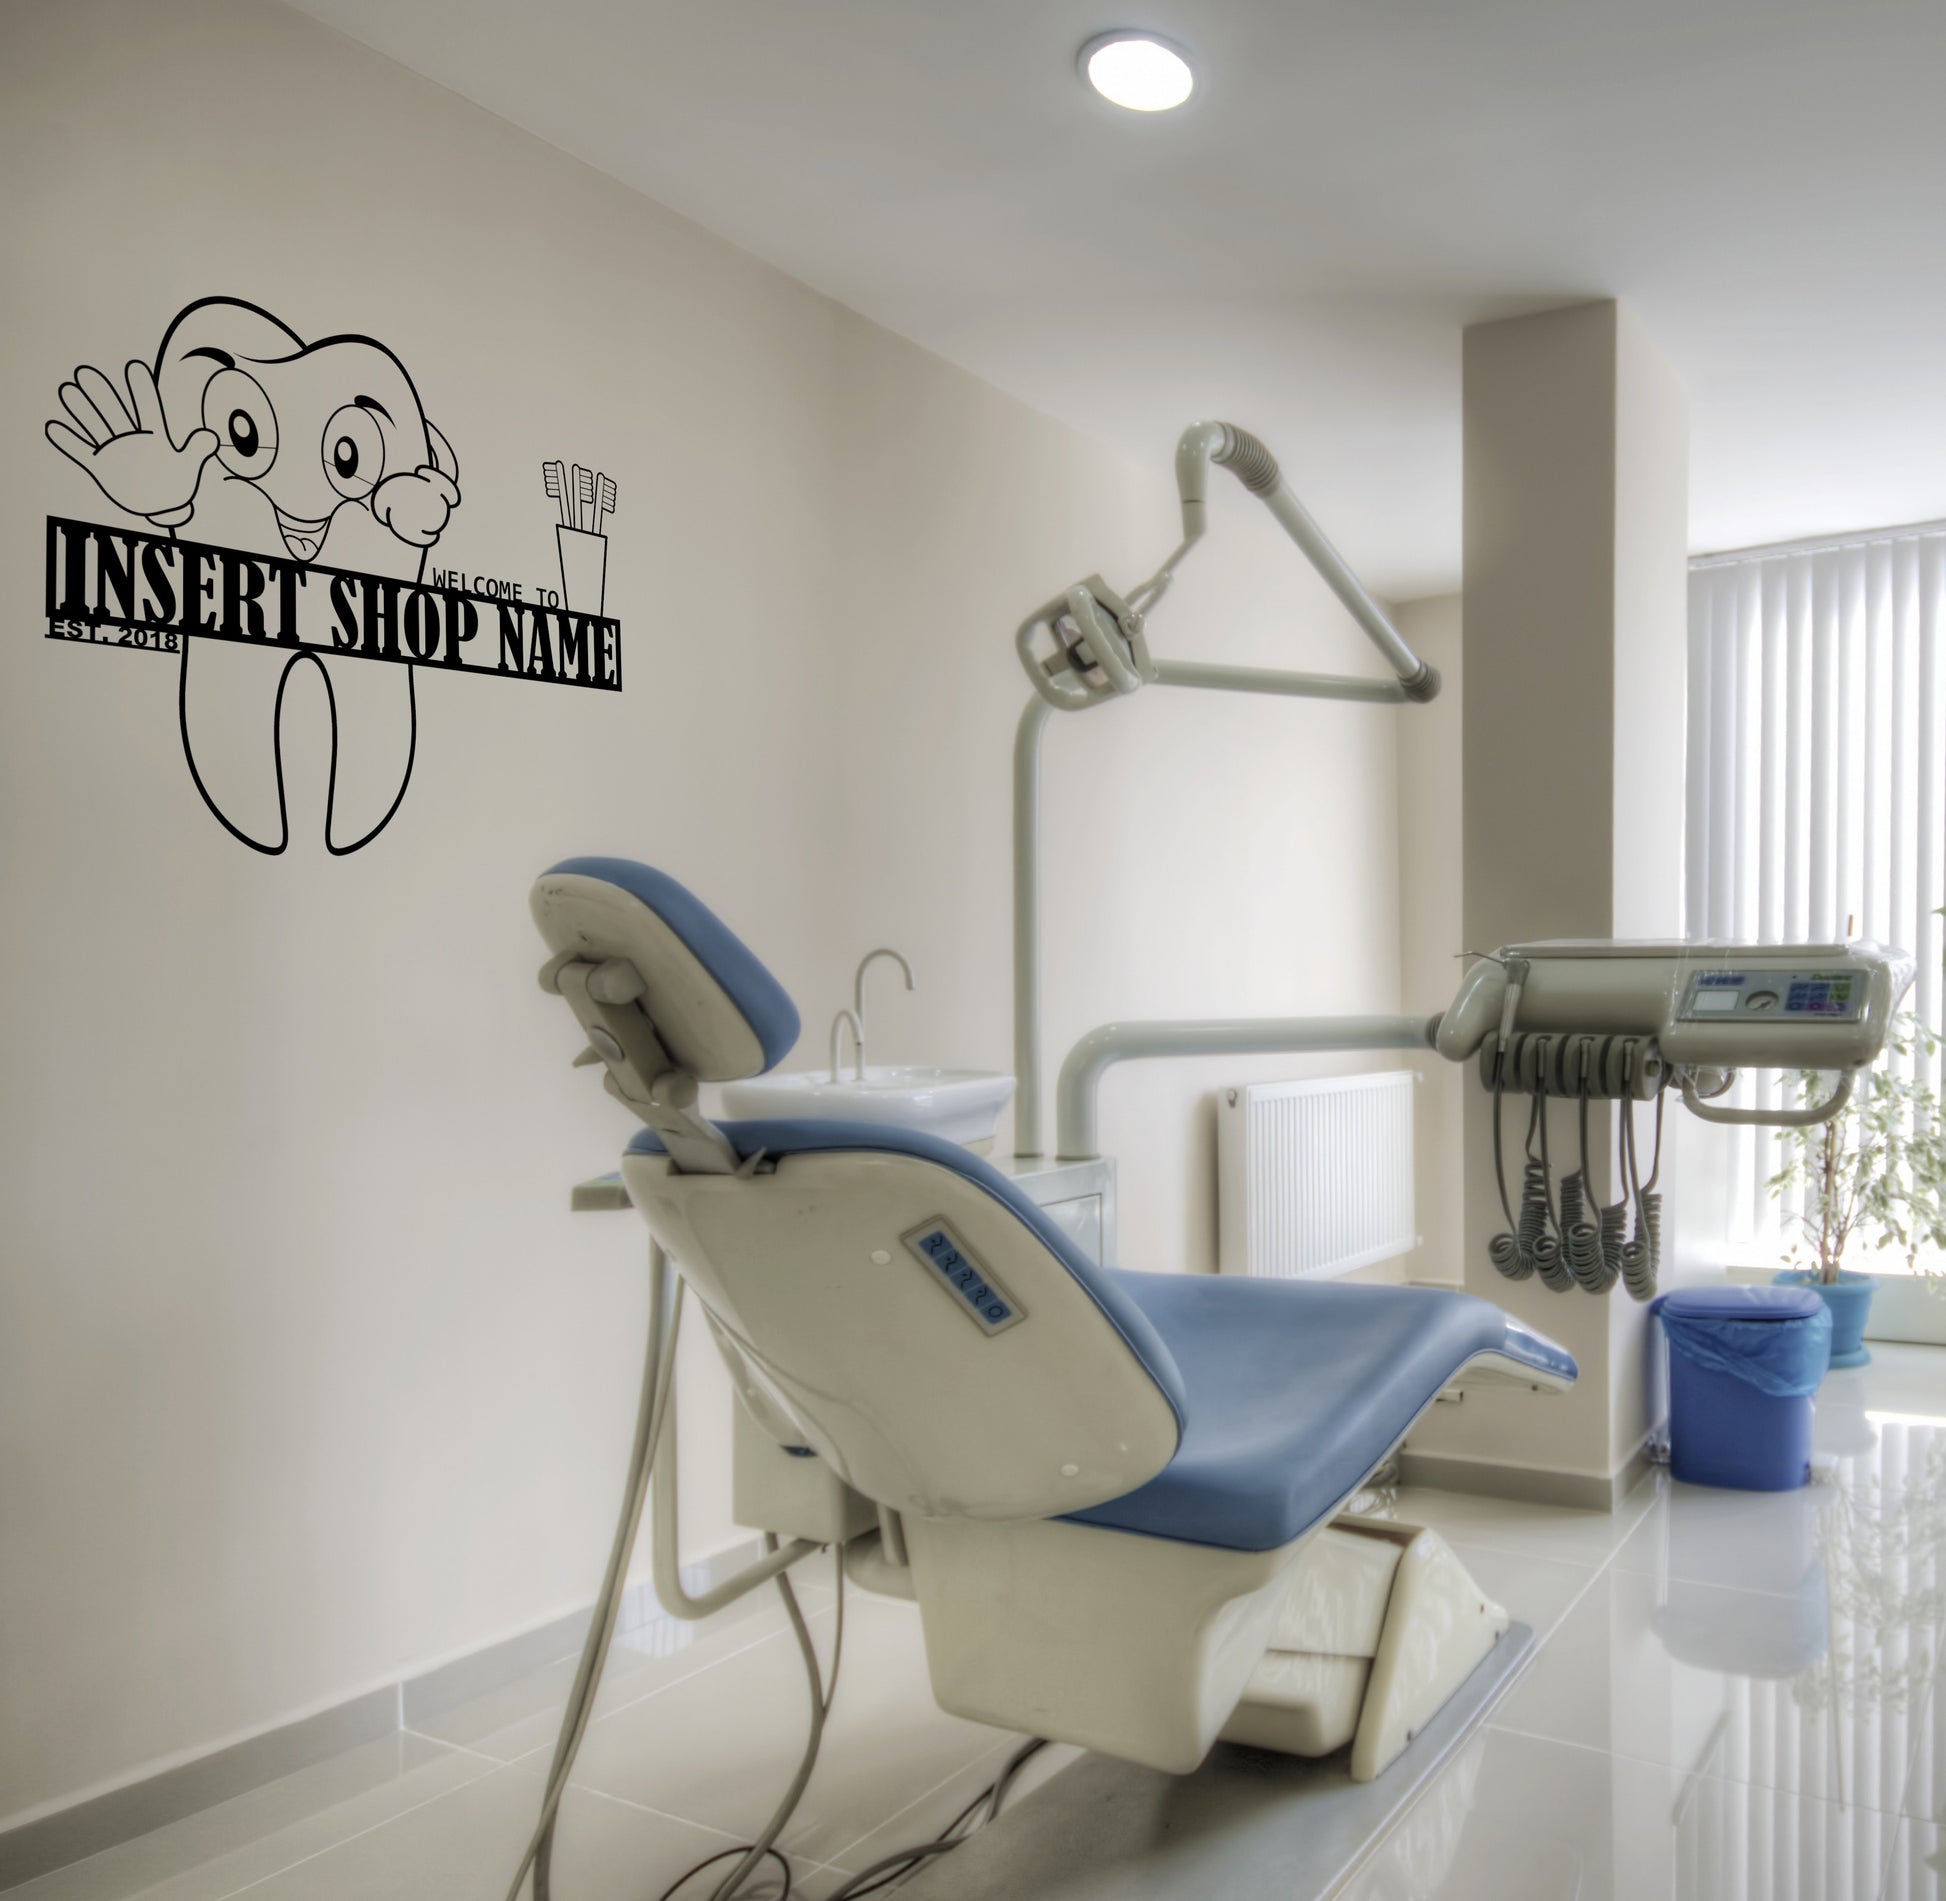 Dentist Gift Dental Office Tooth Decor Gifts for Indonesia